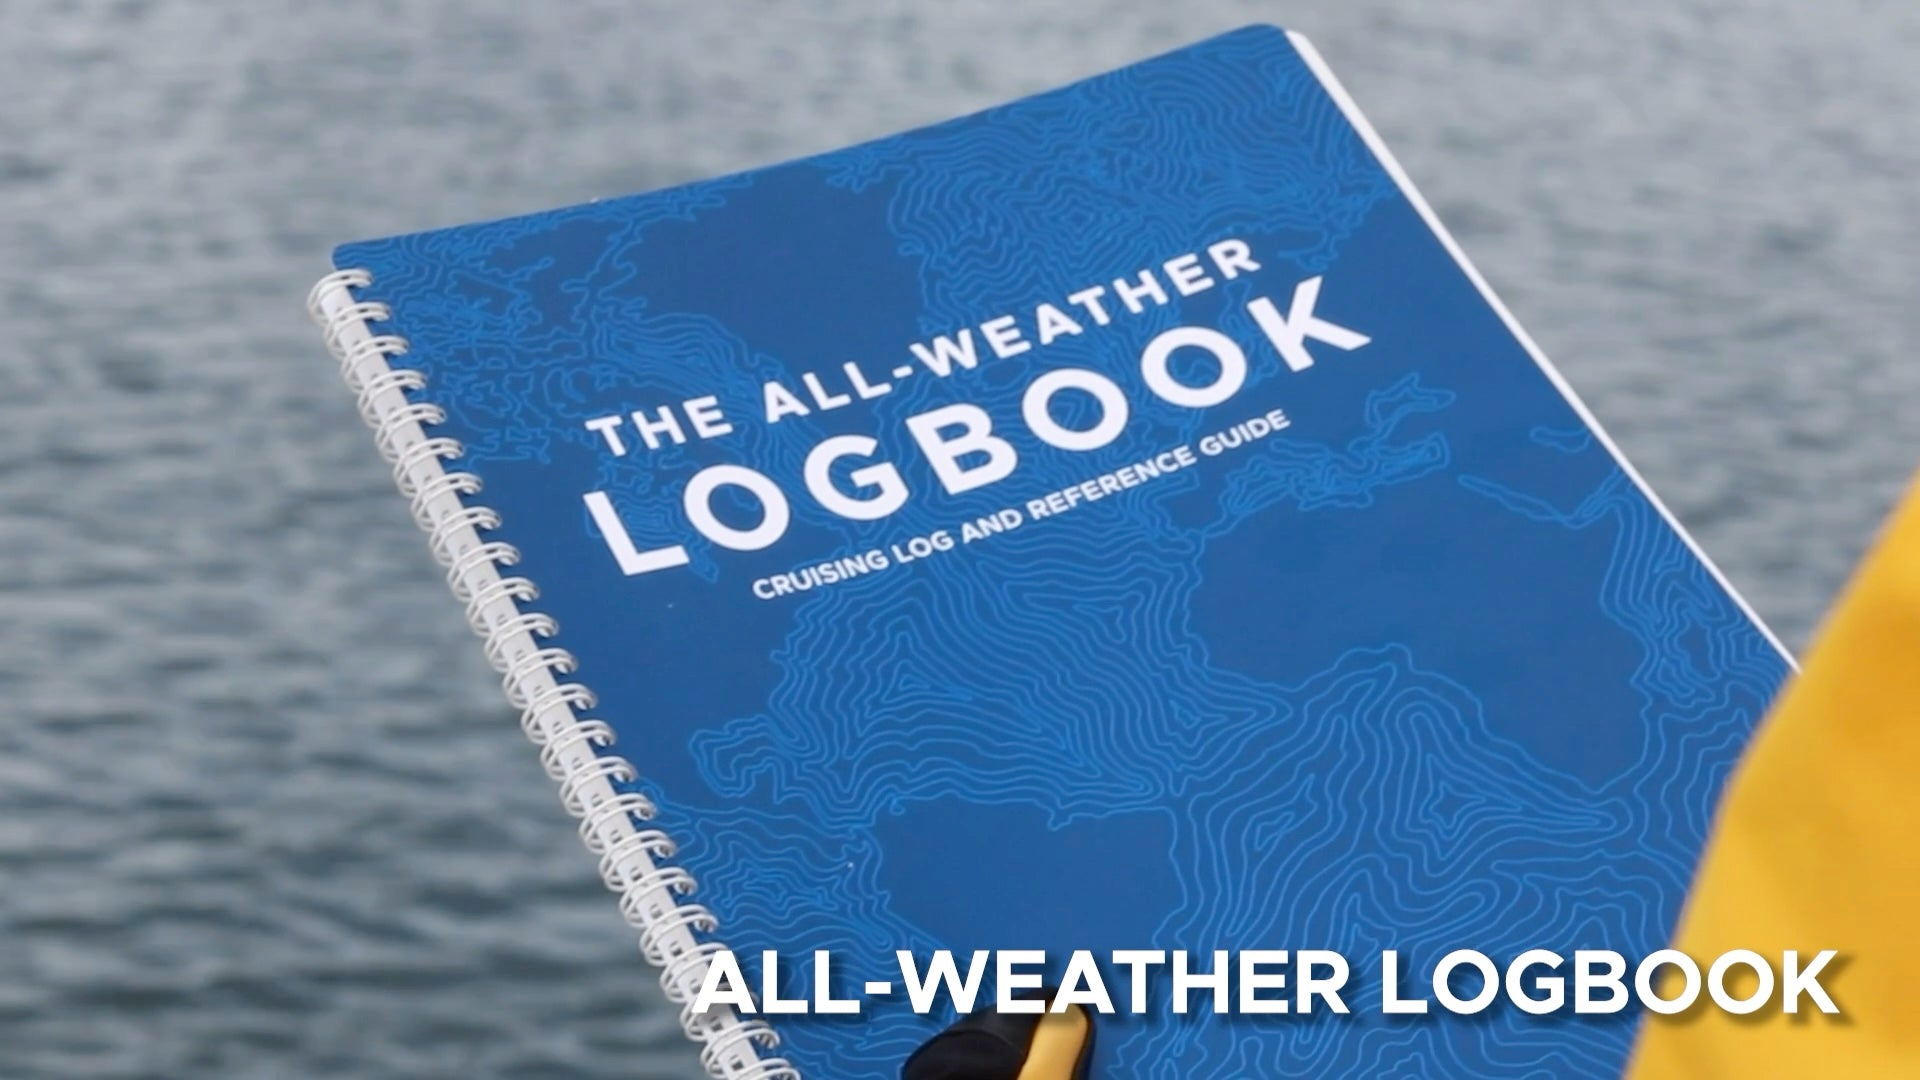 Load video: Video: Backstay All-weather Logbook featuring a reference guide, reusable sailing checklists, sailing logs, and more